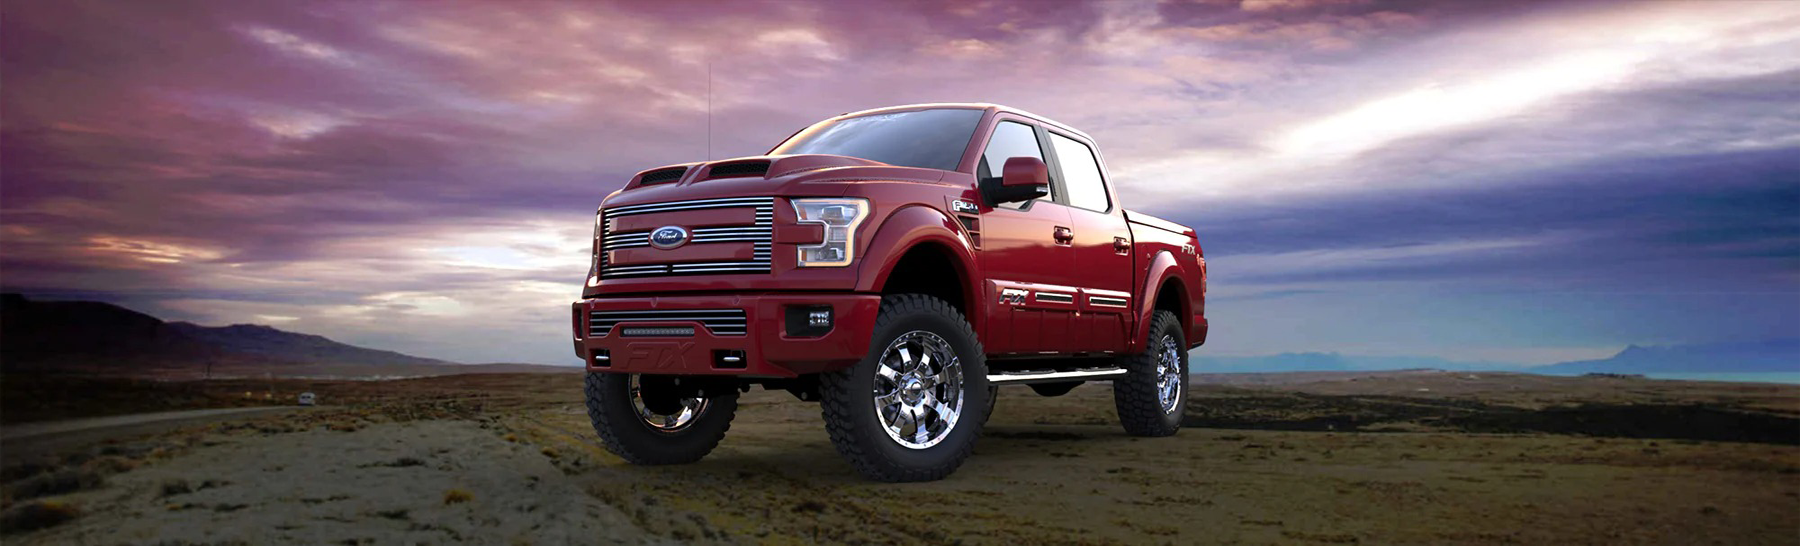 Ford-Tuscany-FTX-Red